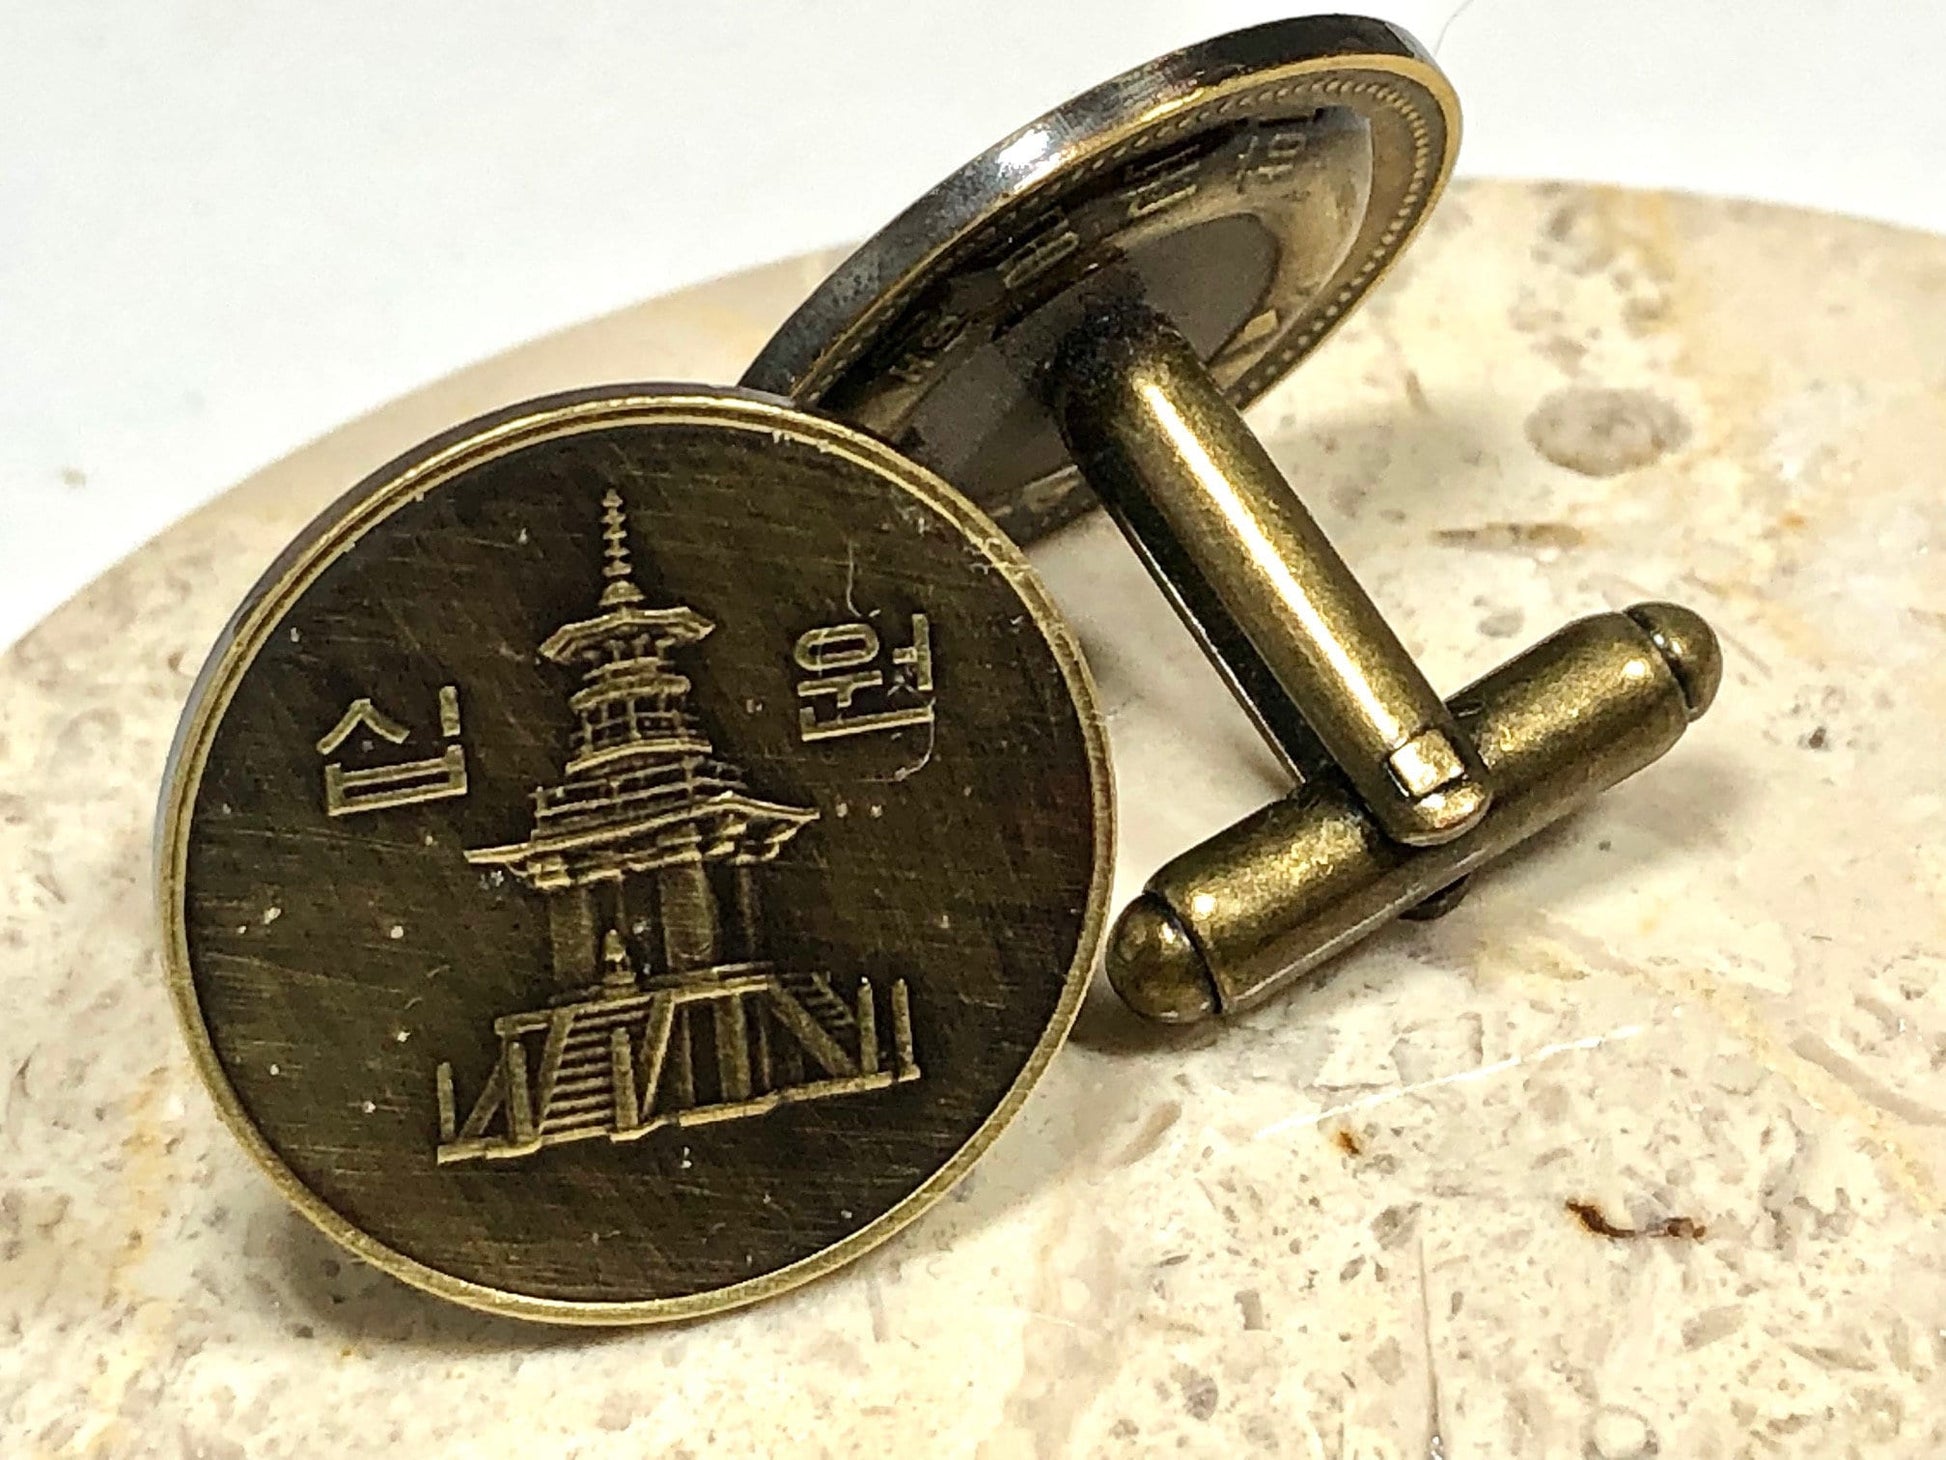 South Korea Coin Cuff Links Korean 10 Won Custom Made Vintage Personal Handmade Jewelry Gift Friend Charm For Him Her World Coin Collector